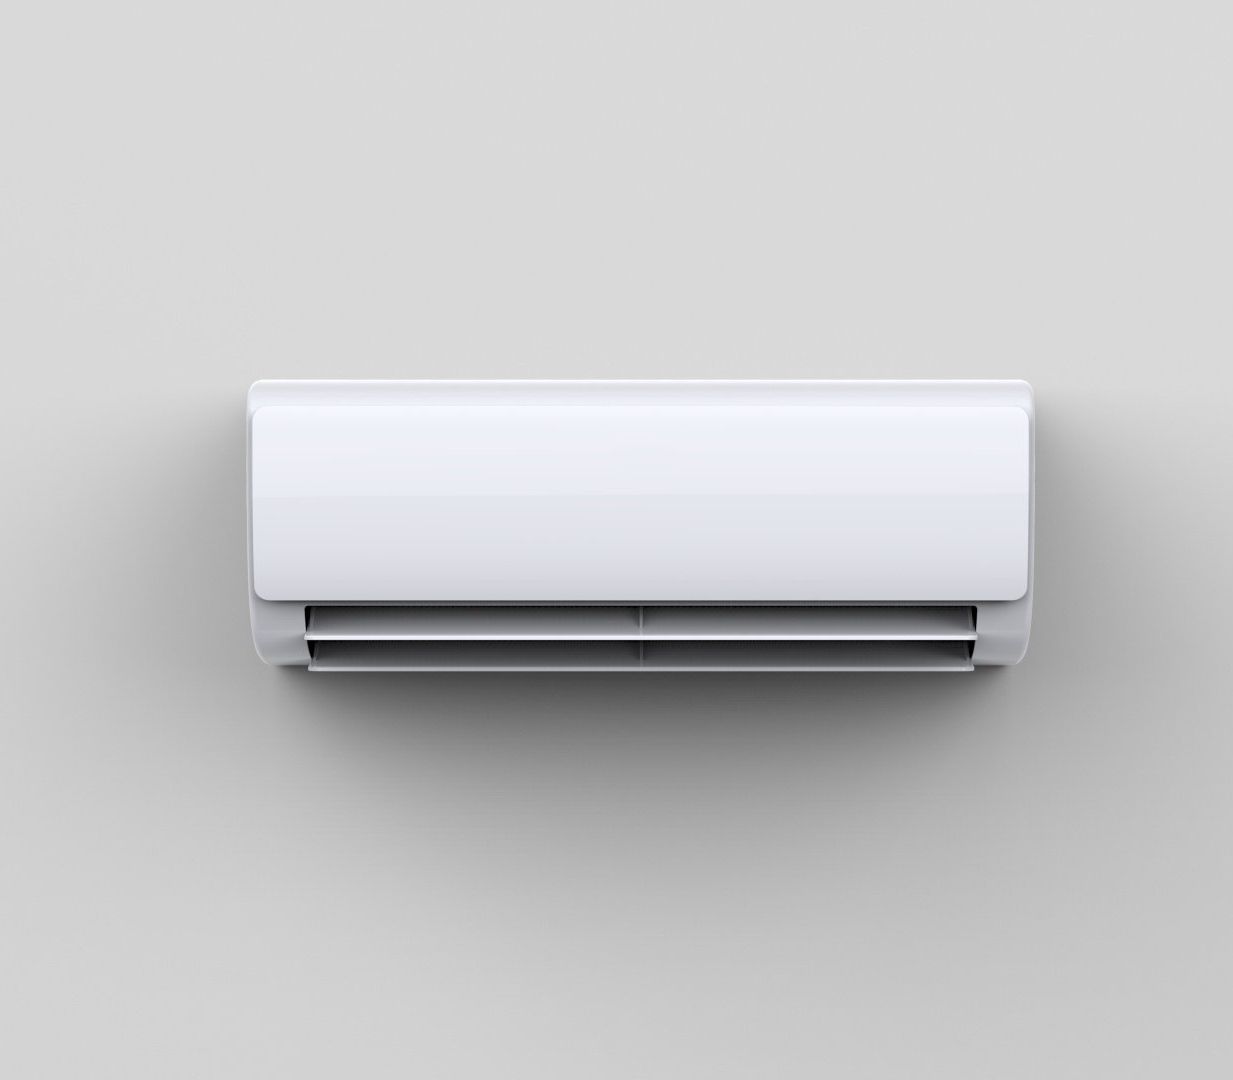 An air conditioner mounted on a wall featuring a sleek design